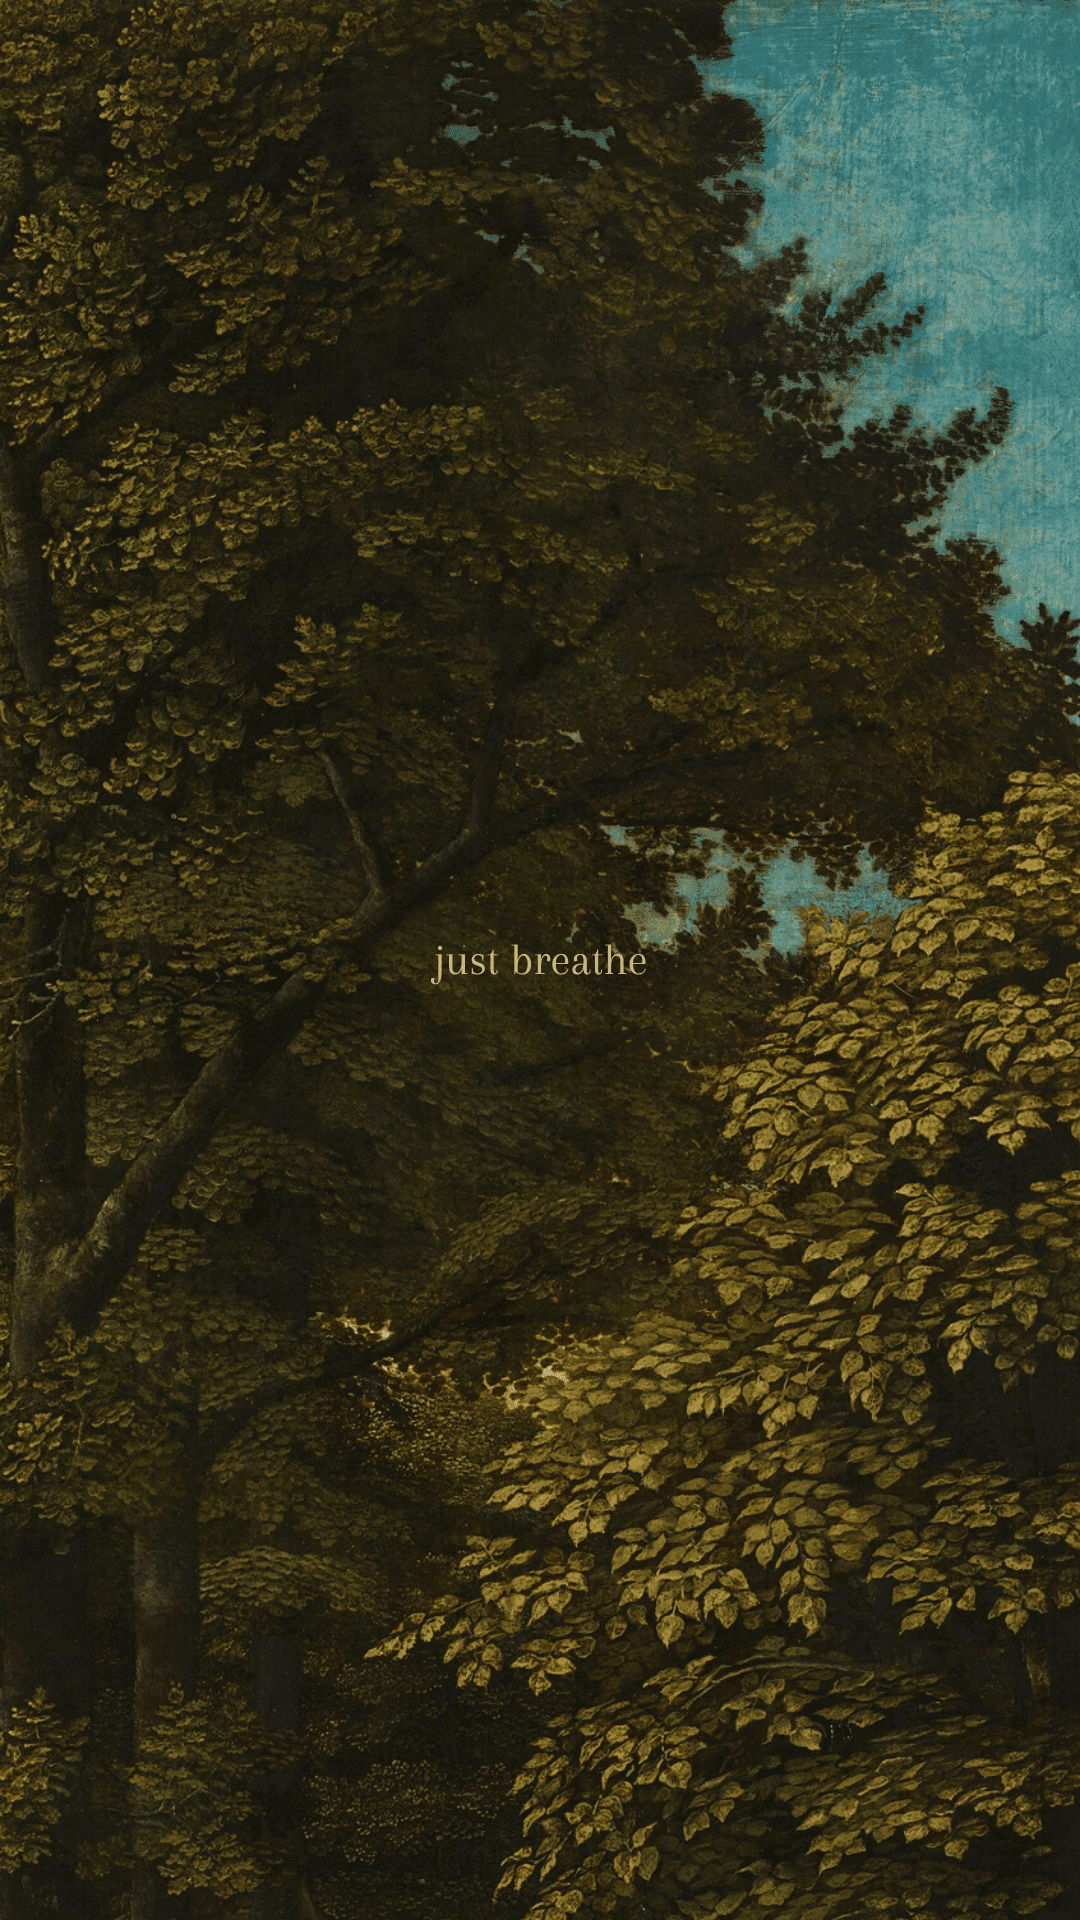 A painting of a forest with the words 